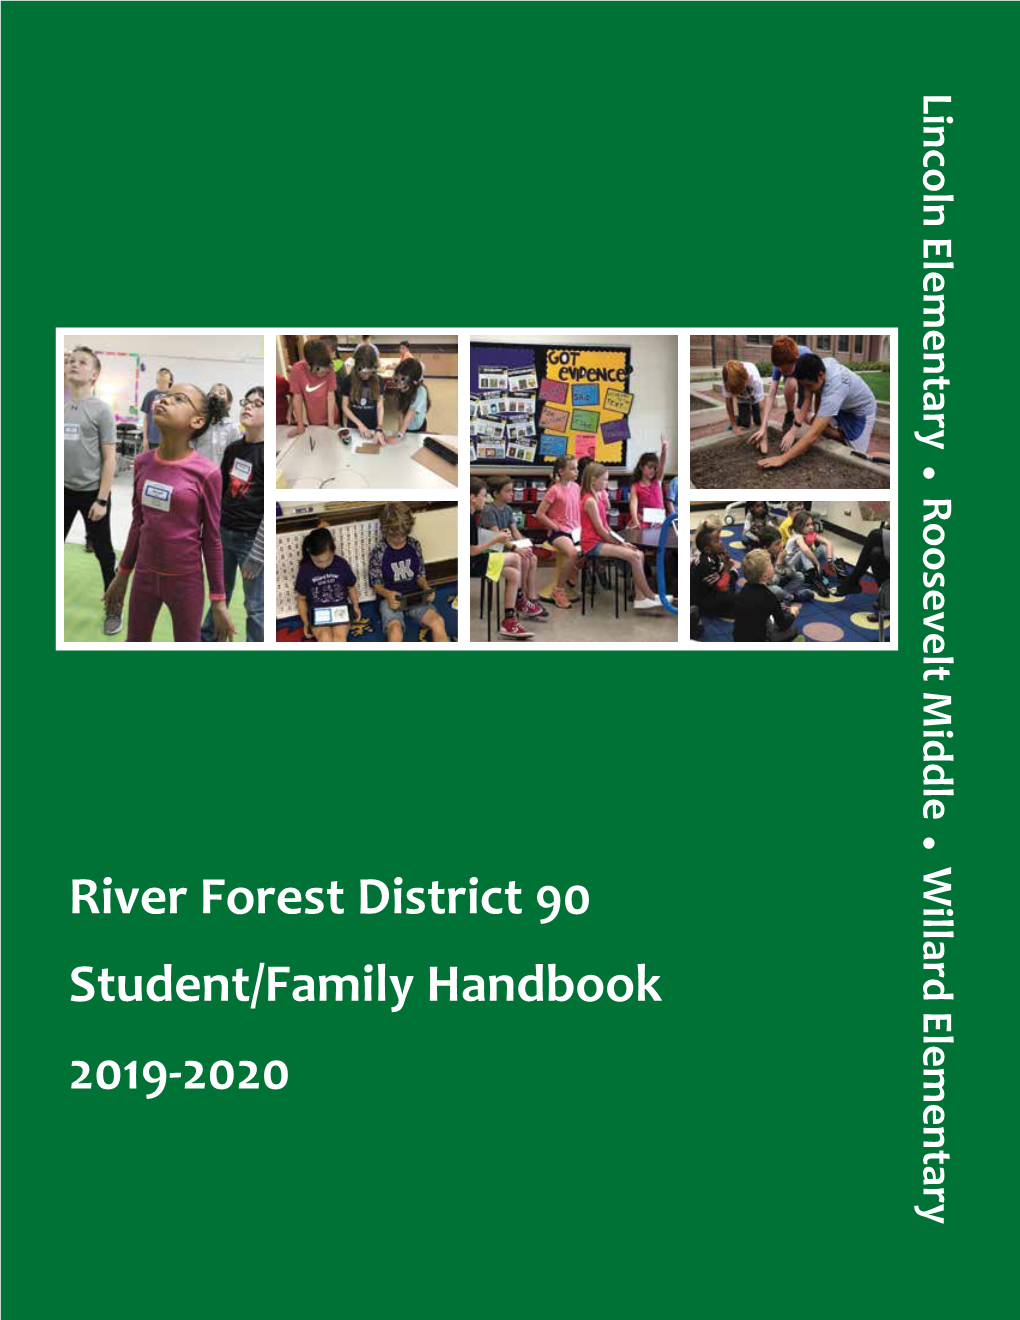 River Forest District 90 Student/Family Handbook 2019-2020